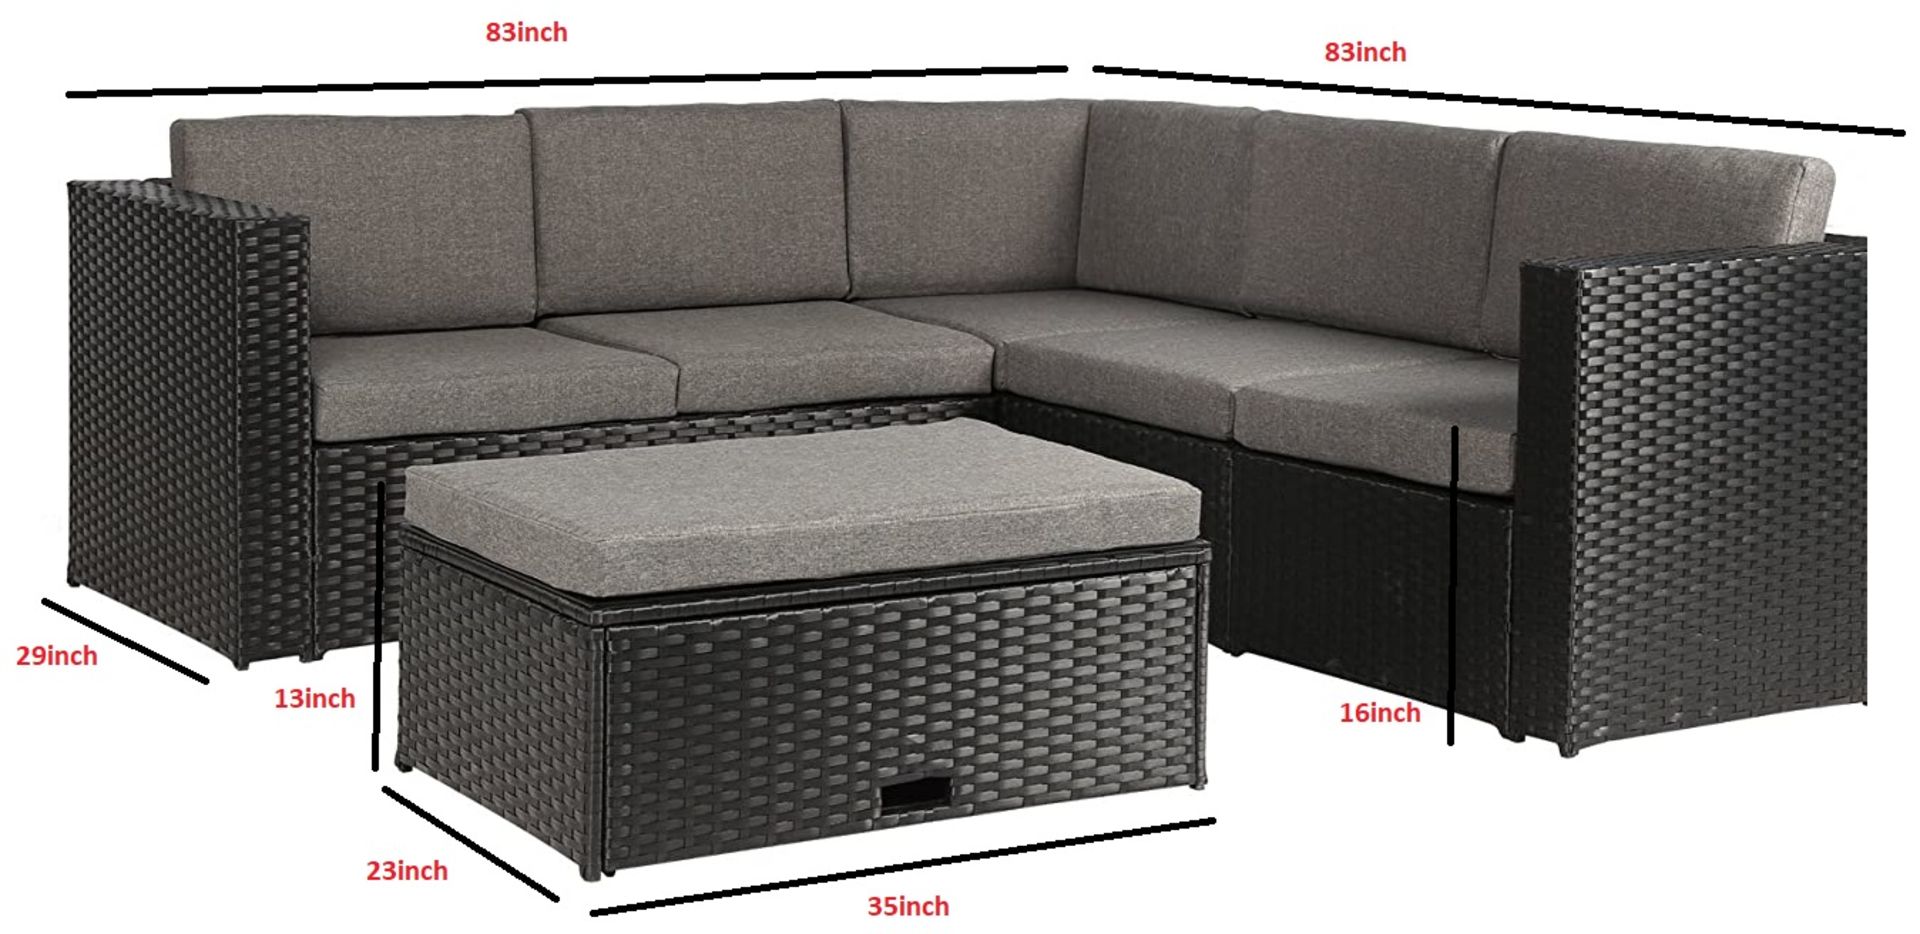 Carfin Black Wicker Corner Sofa Set with Coffee Table and Storage - Image 2 of 2